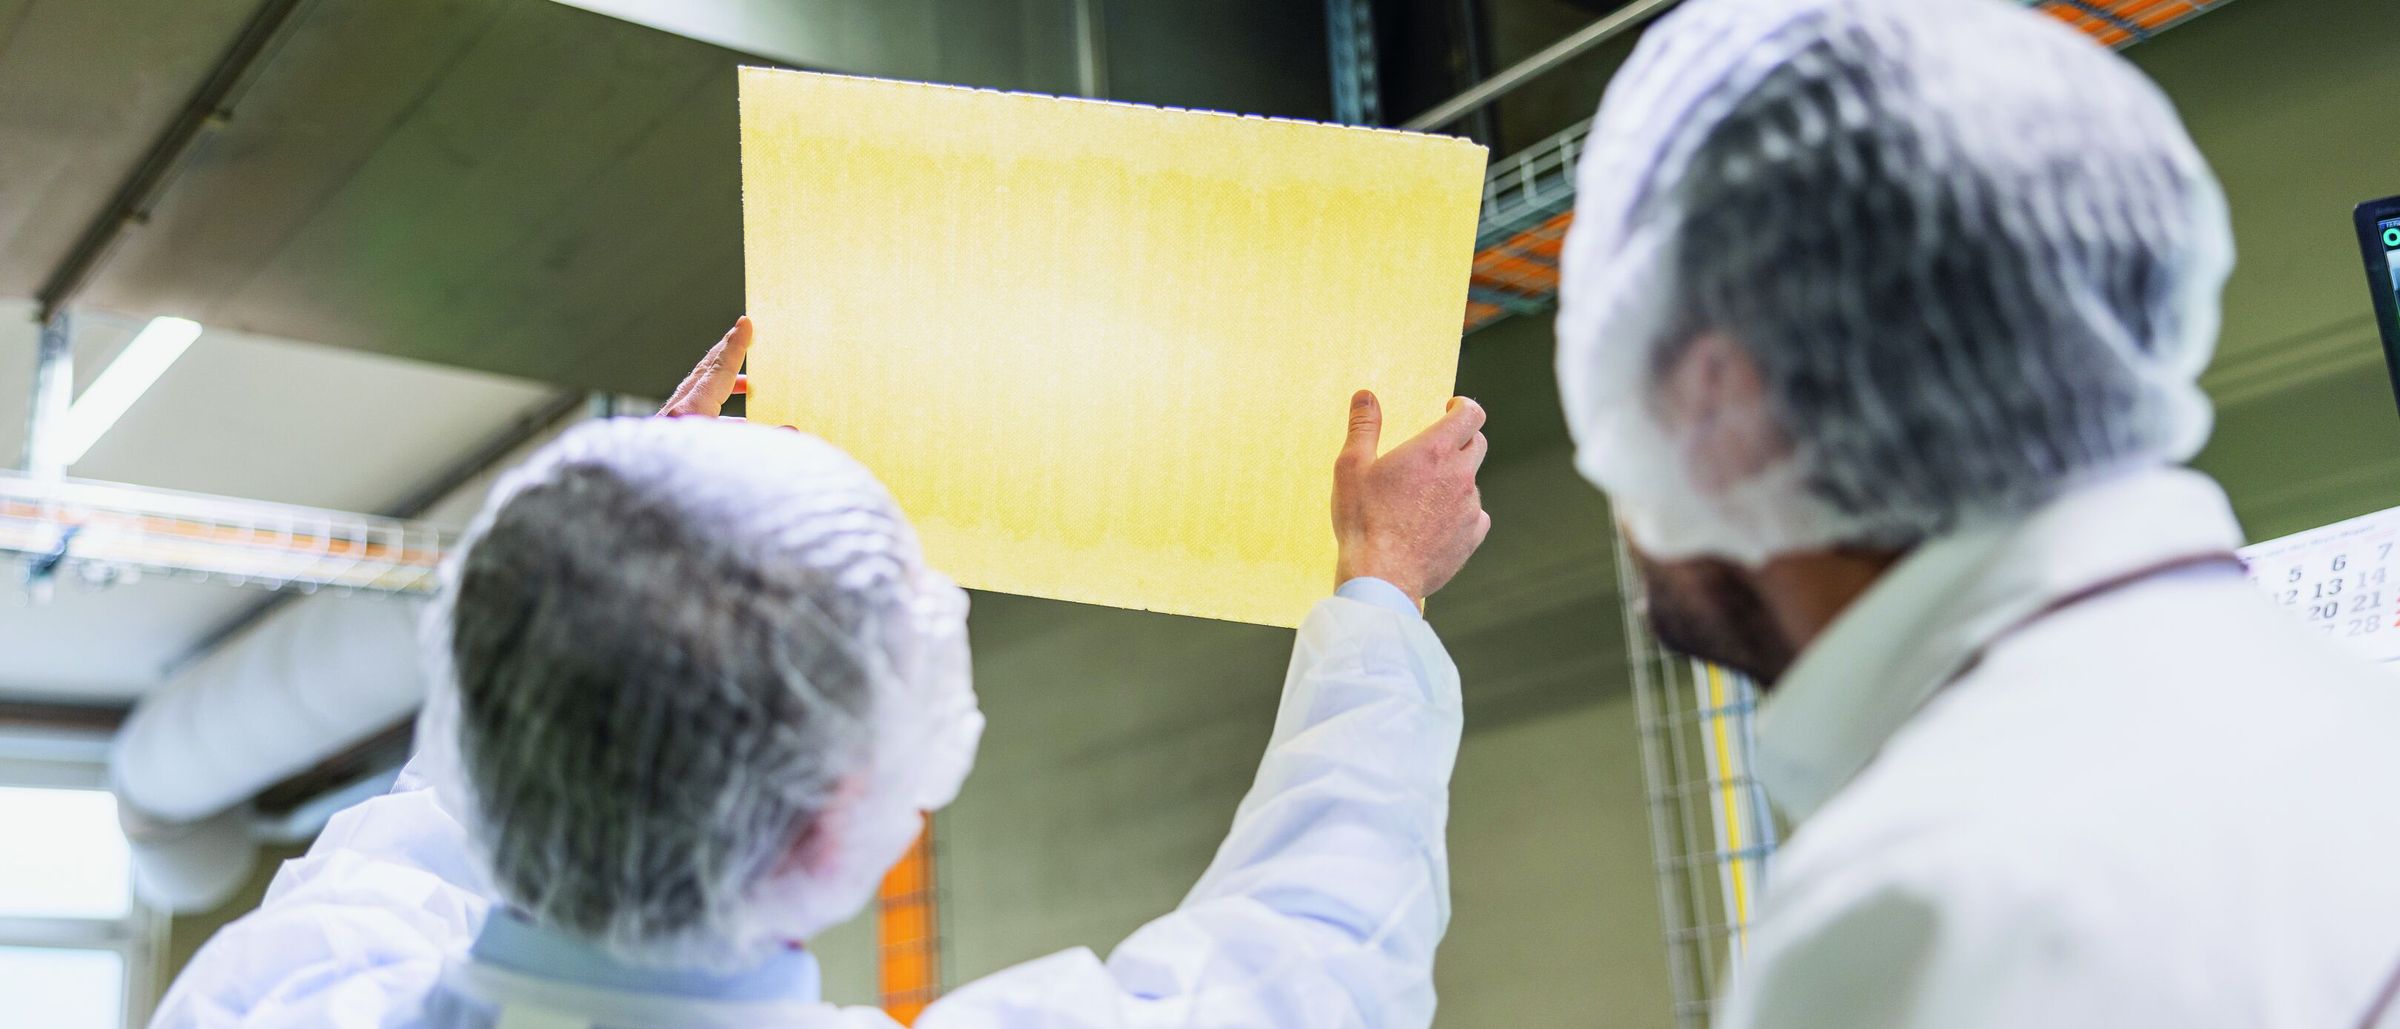 Christian Salvatori, Sales Manager at Bühler, and Pascal Grin, COO at Kägi, check the quality of the wafer sheets. 